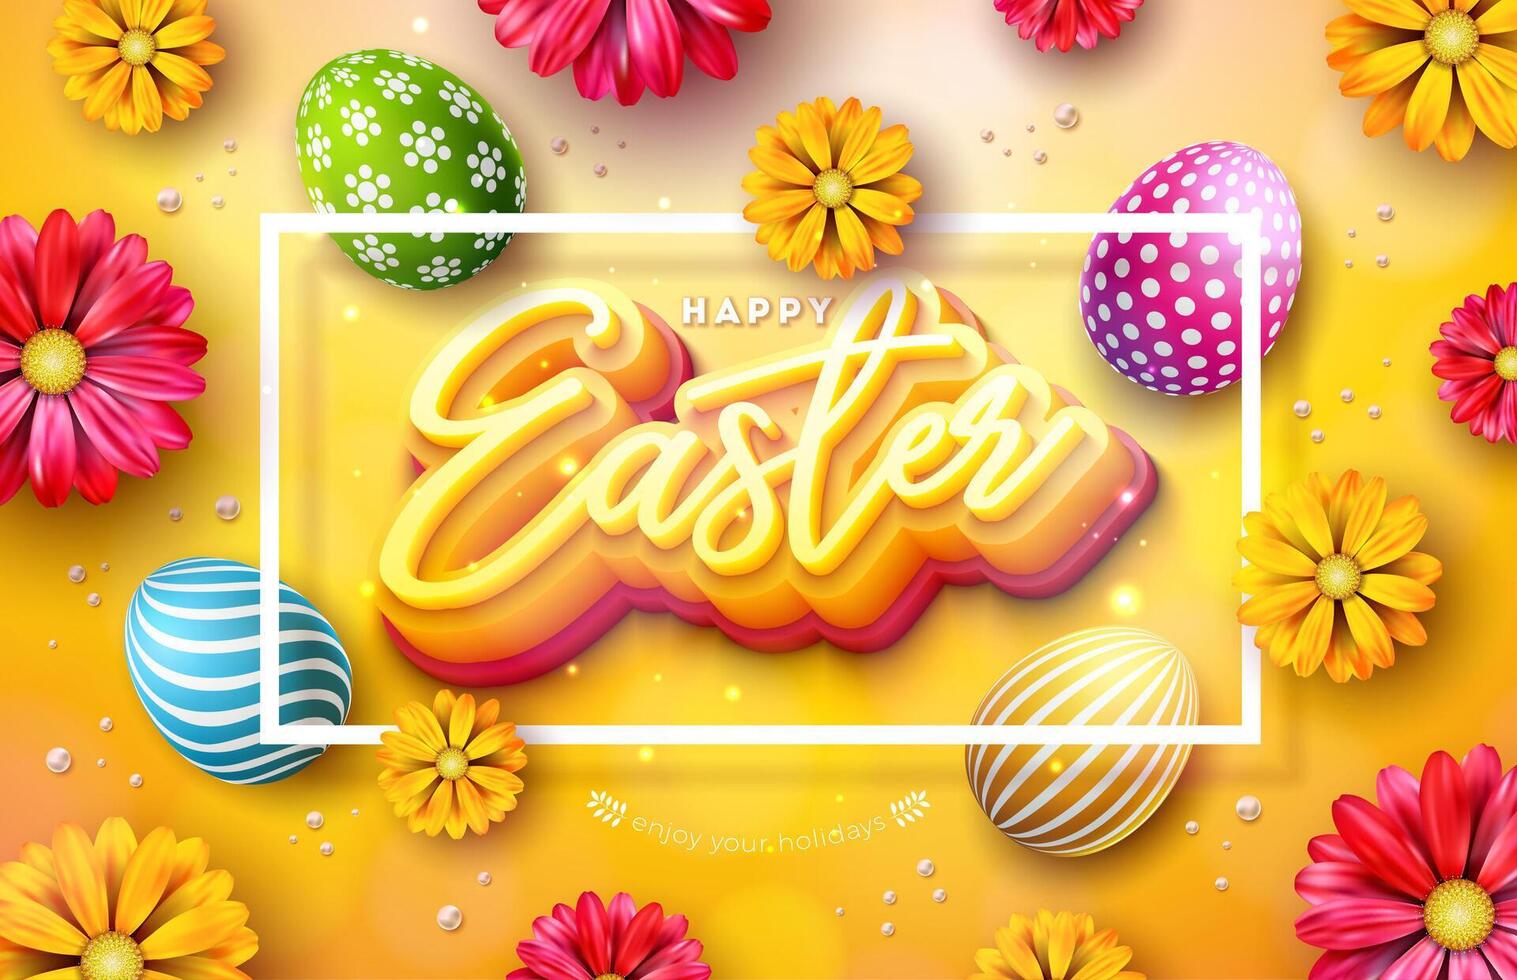 Happy Easter Illustration with Colorful Painted Egg and Spring Flower on Yellow Background. Vector Easter Day Celebration Design for Flyer, Greeting Card, Banner, Holiday Poster or Party Invitation